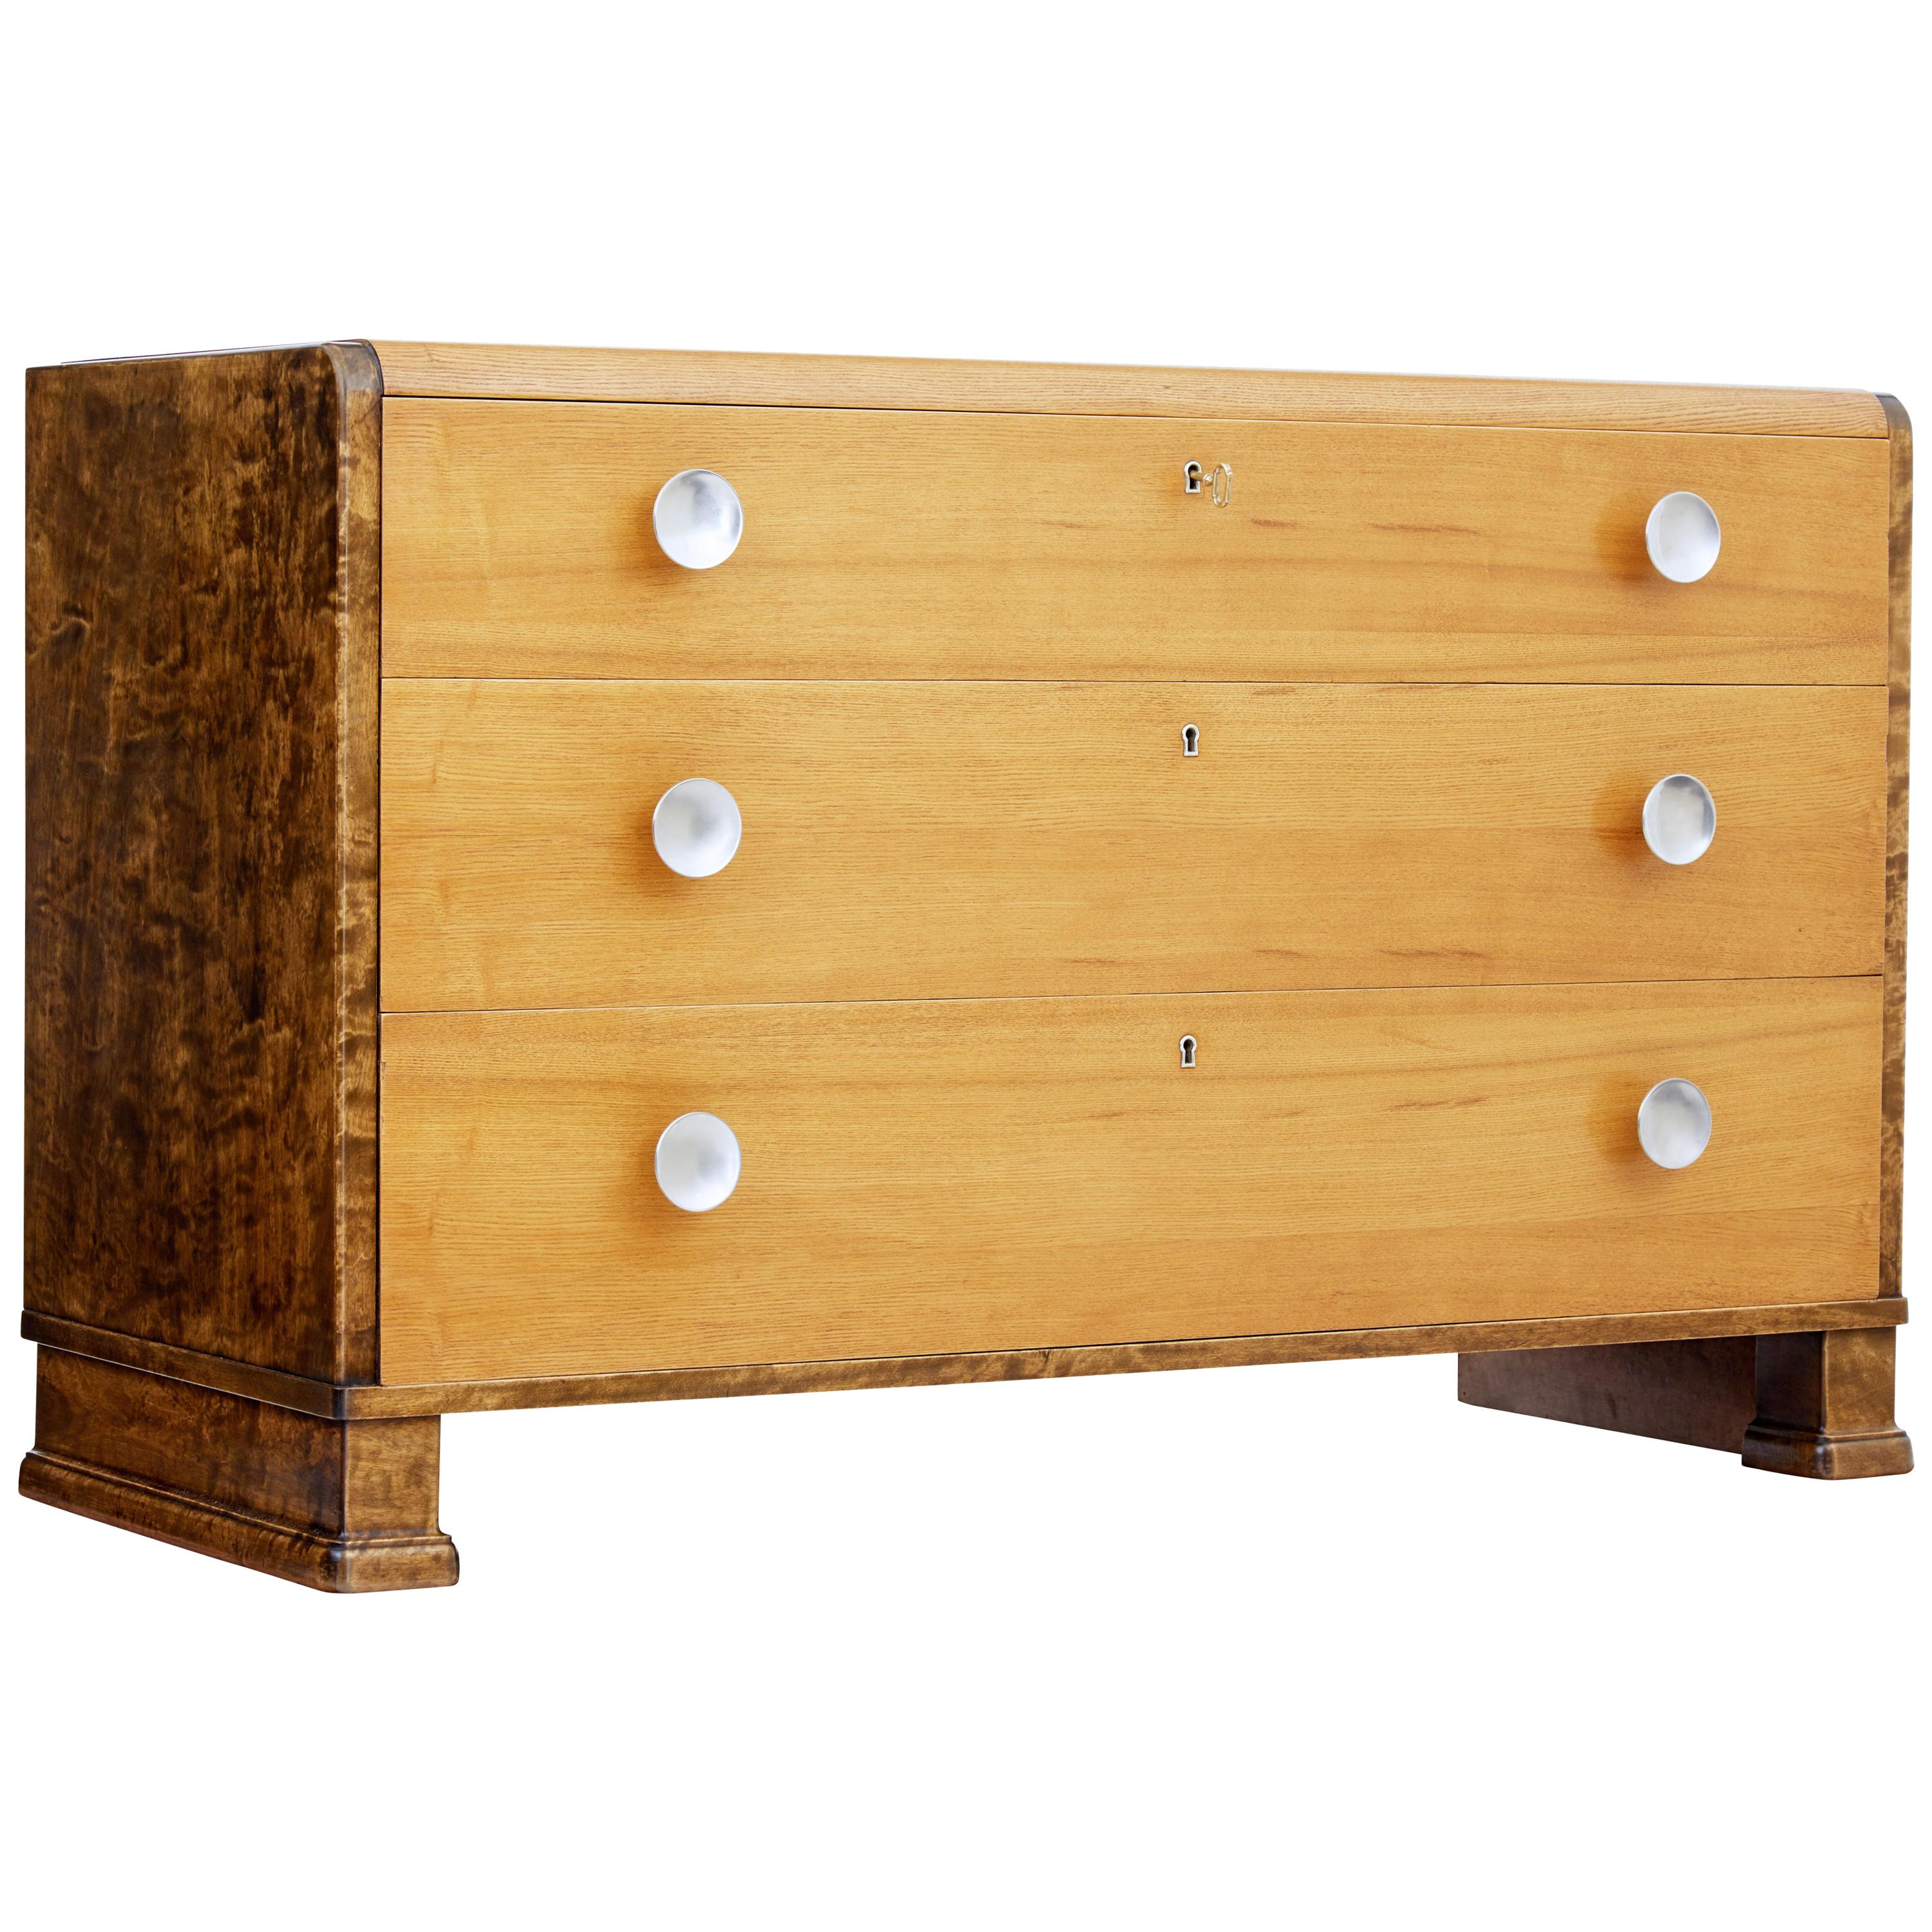 Mid-20th Century Birch and Elm Chest of Drawers